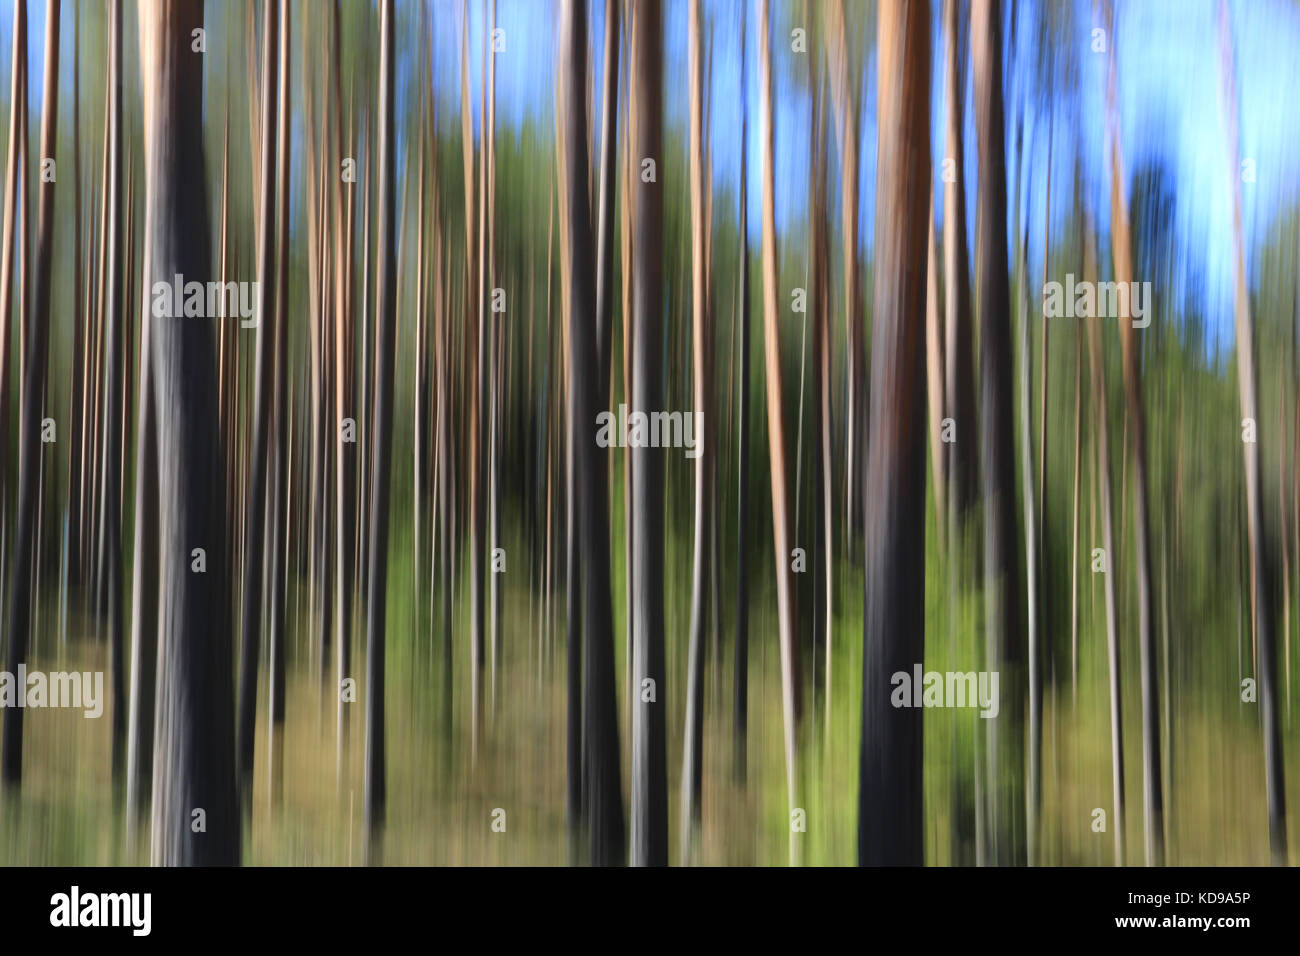 Artistic landscape with pine forest, tree trunks and blue sky, effect achieved with in-camera motion blur. Stock Photo